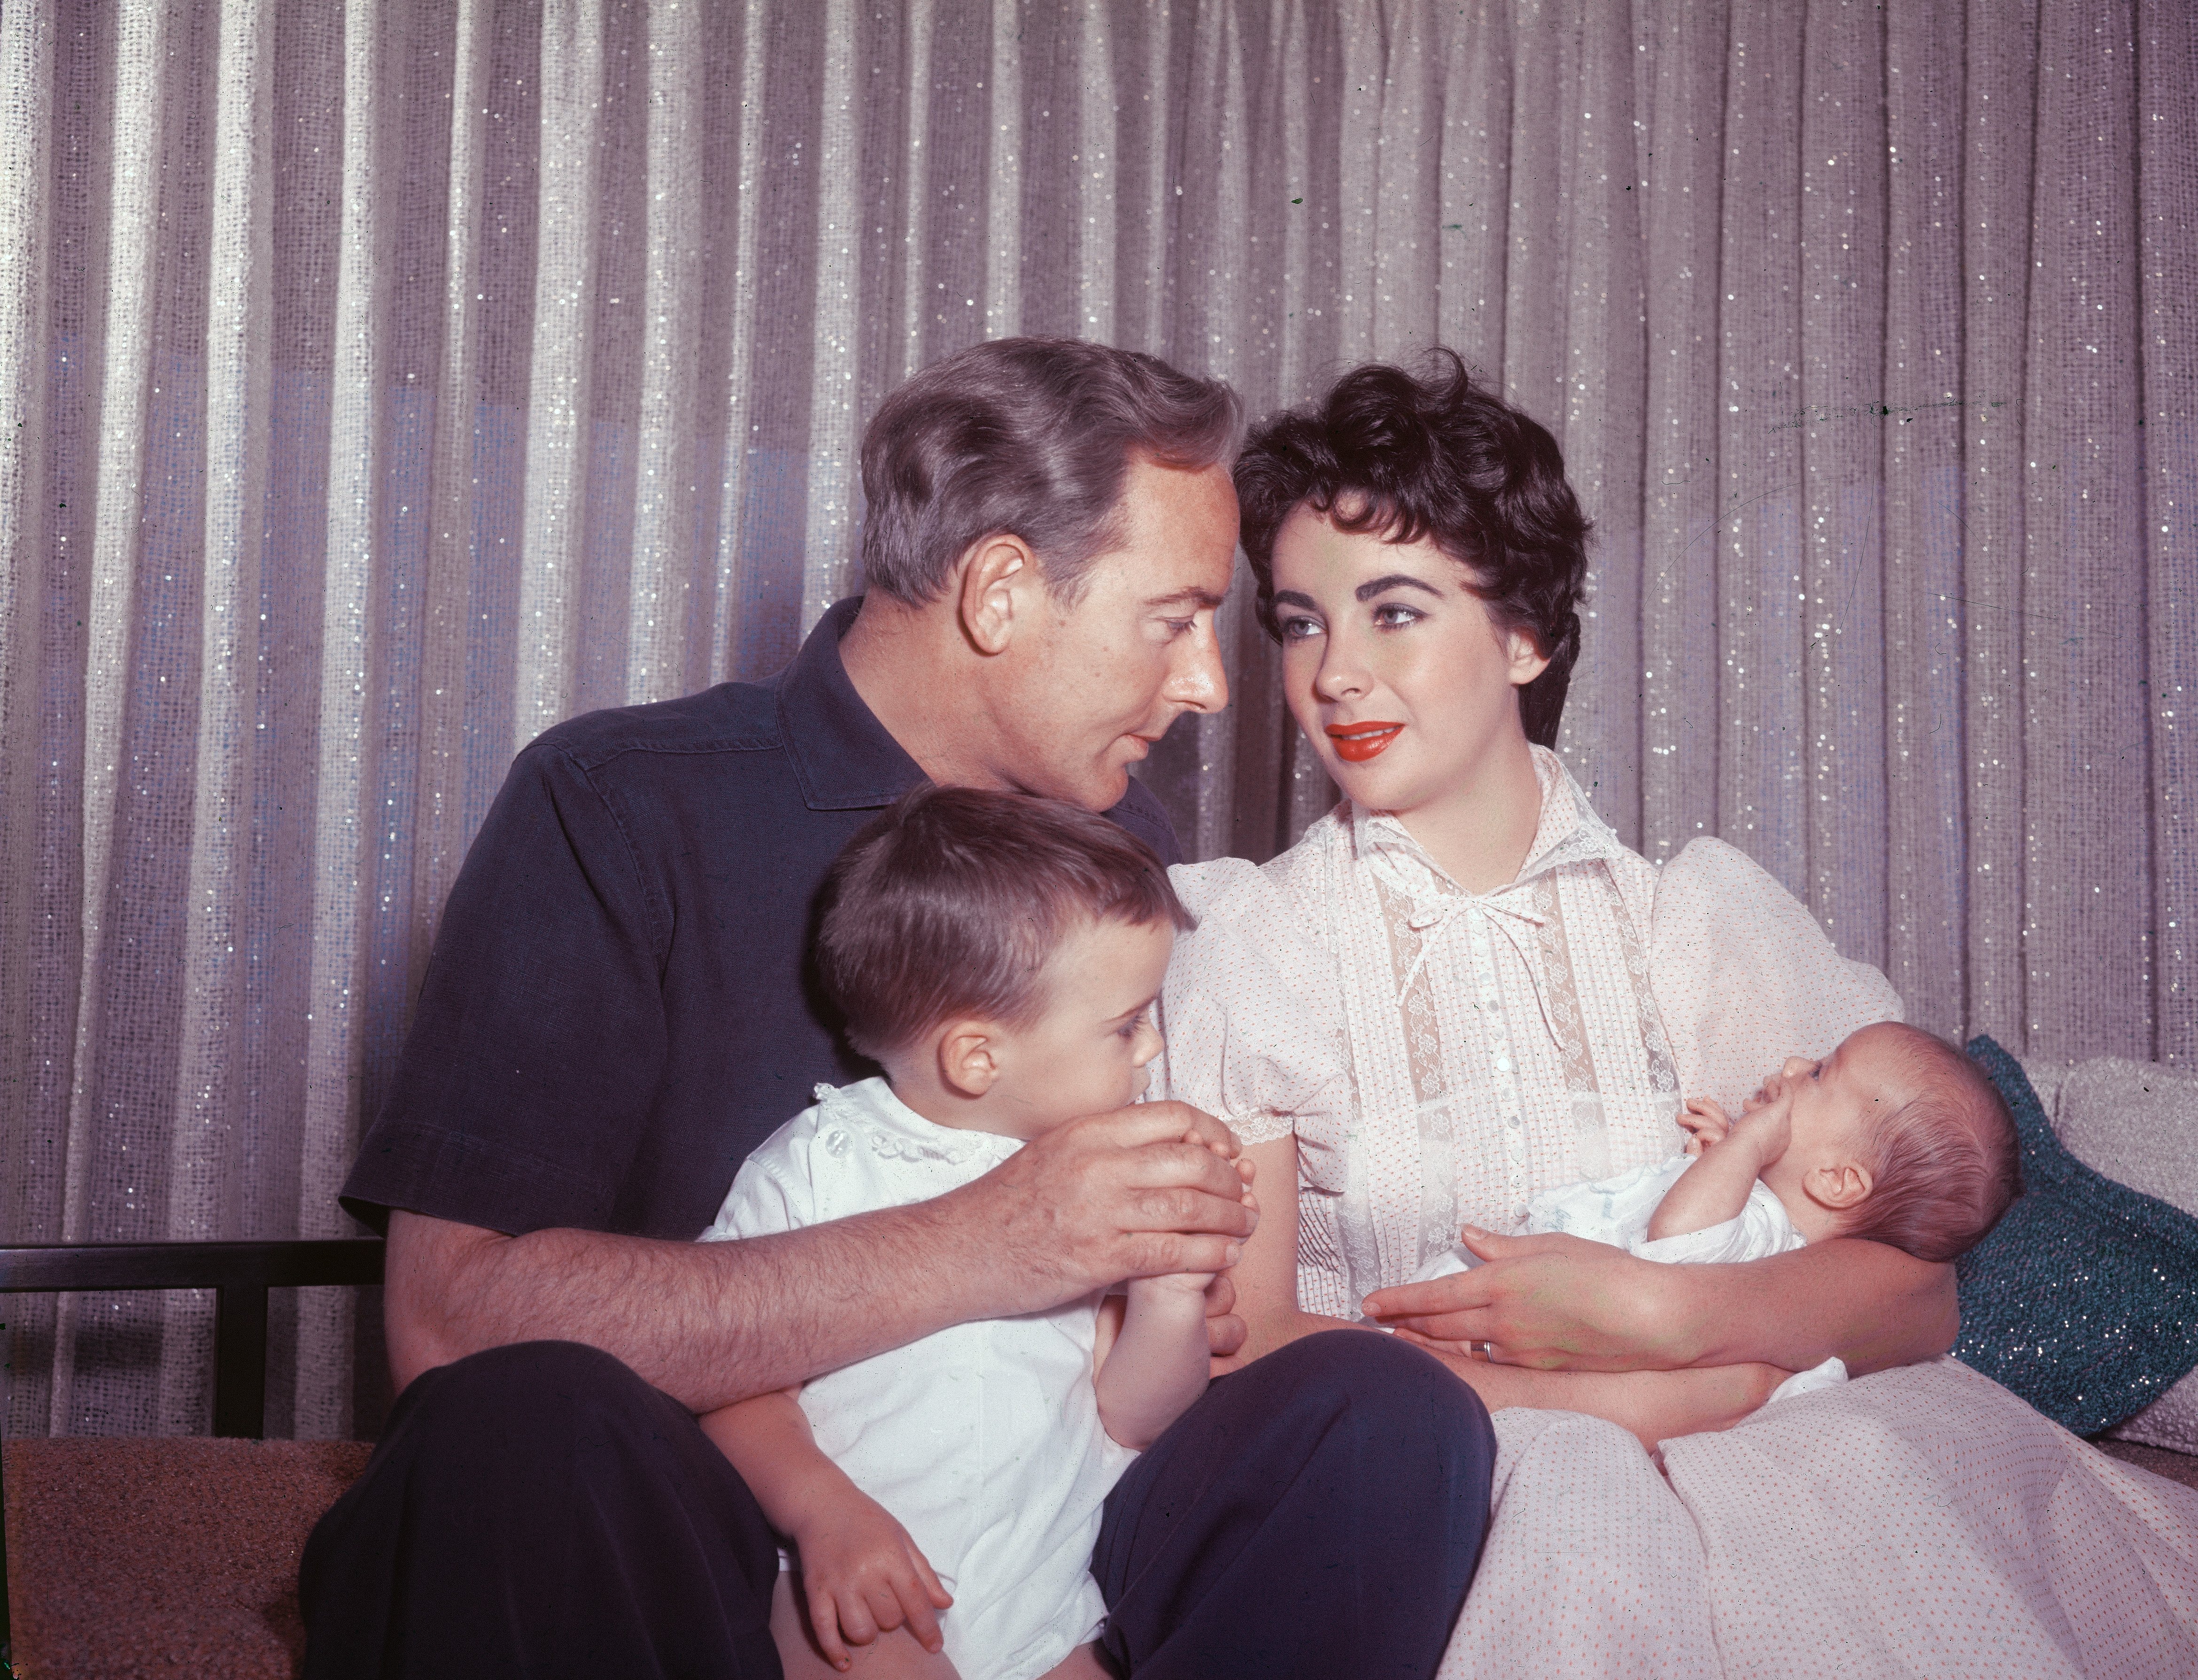 Elizabeth Taylor and husband Michael Wilding with their sons Michael Jr and newborn Christopher, Los Angeles, California, 1955. / Source: Getty Images